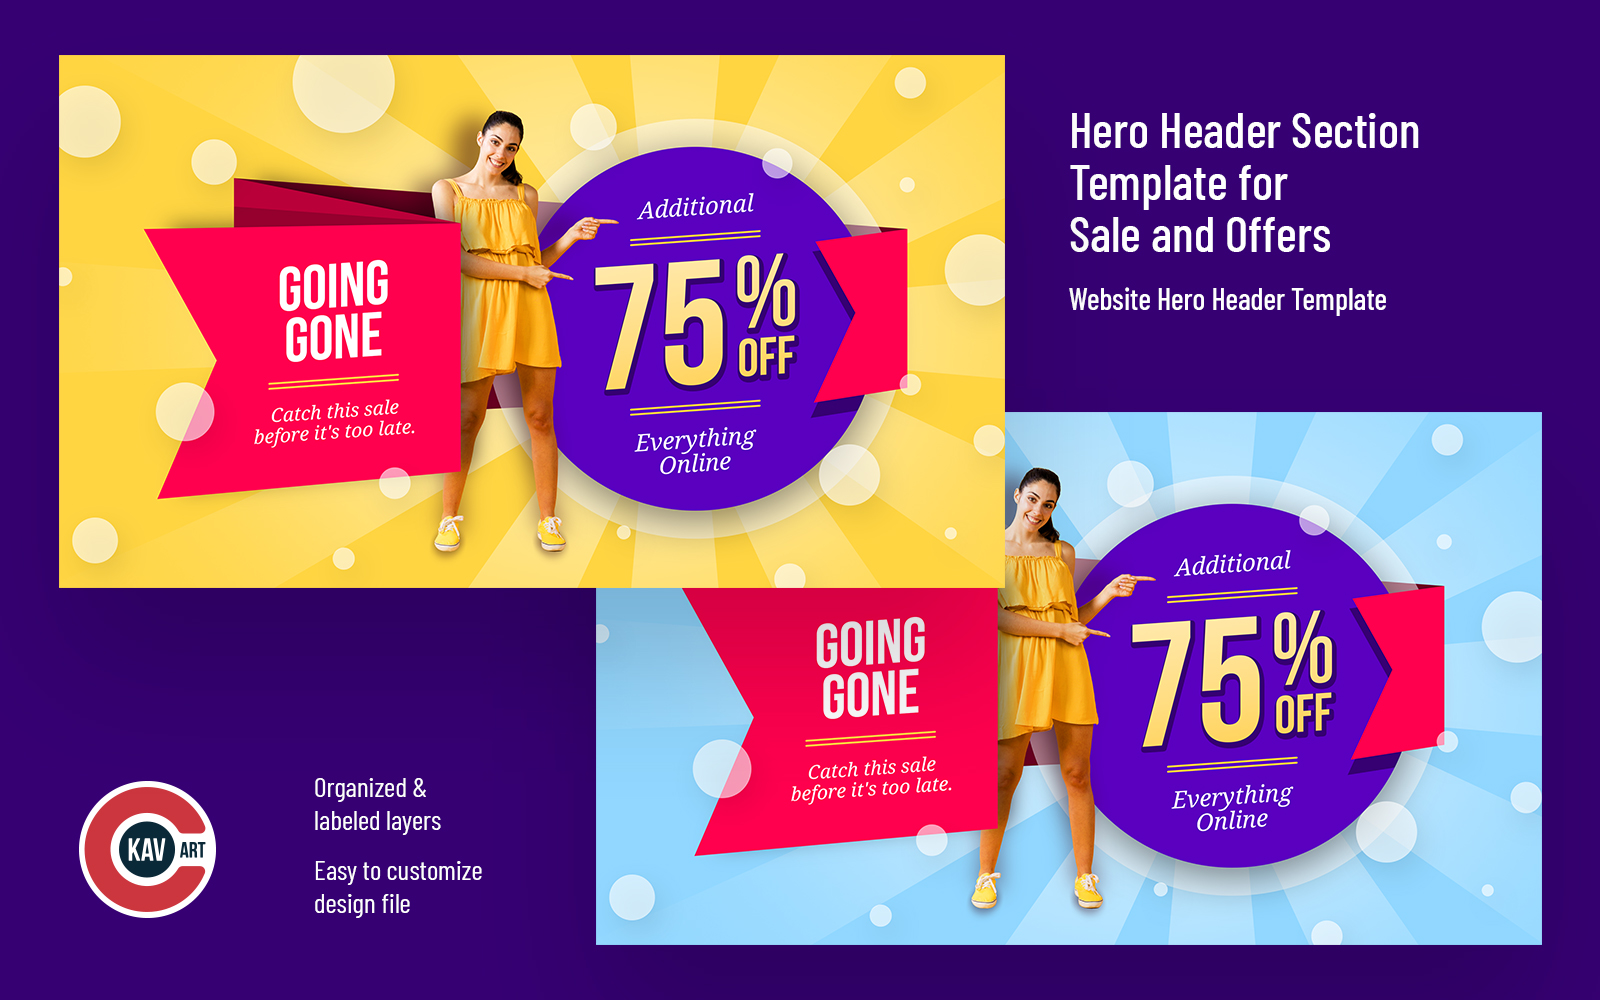 Hero Header Section Template for Fashion Sale and Offers